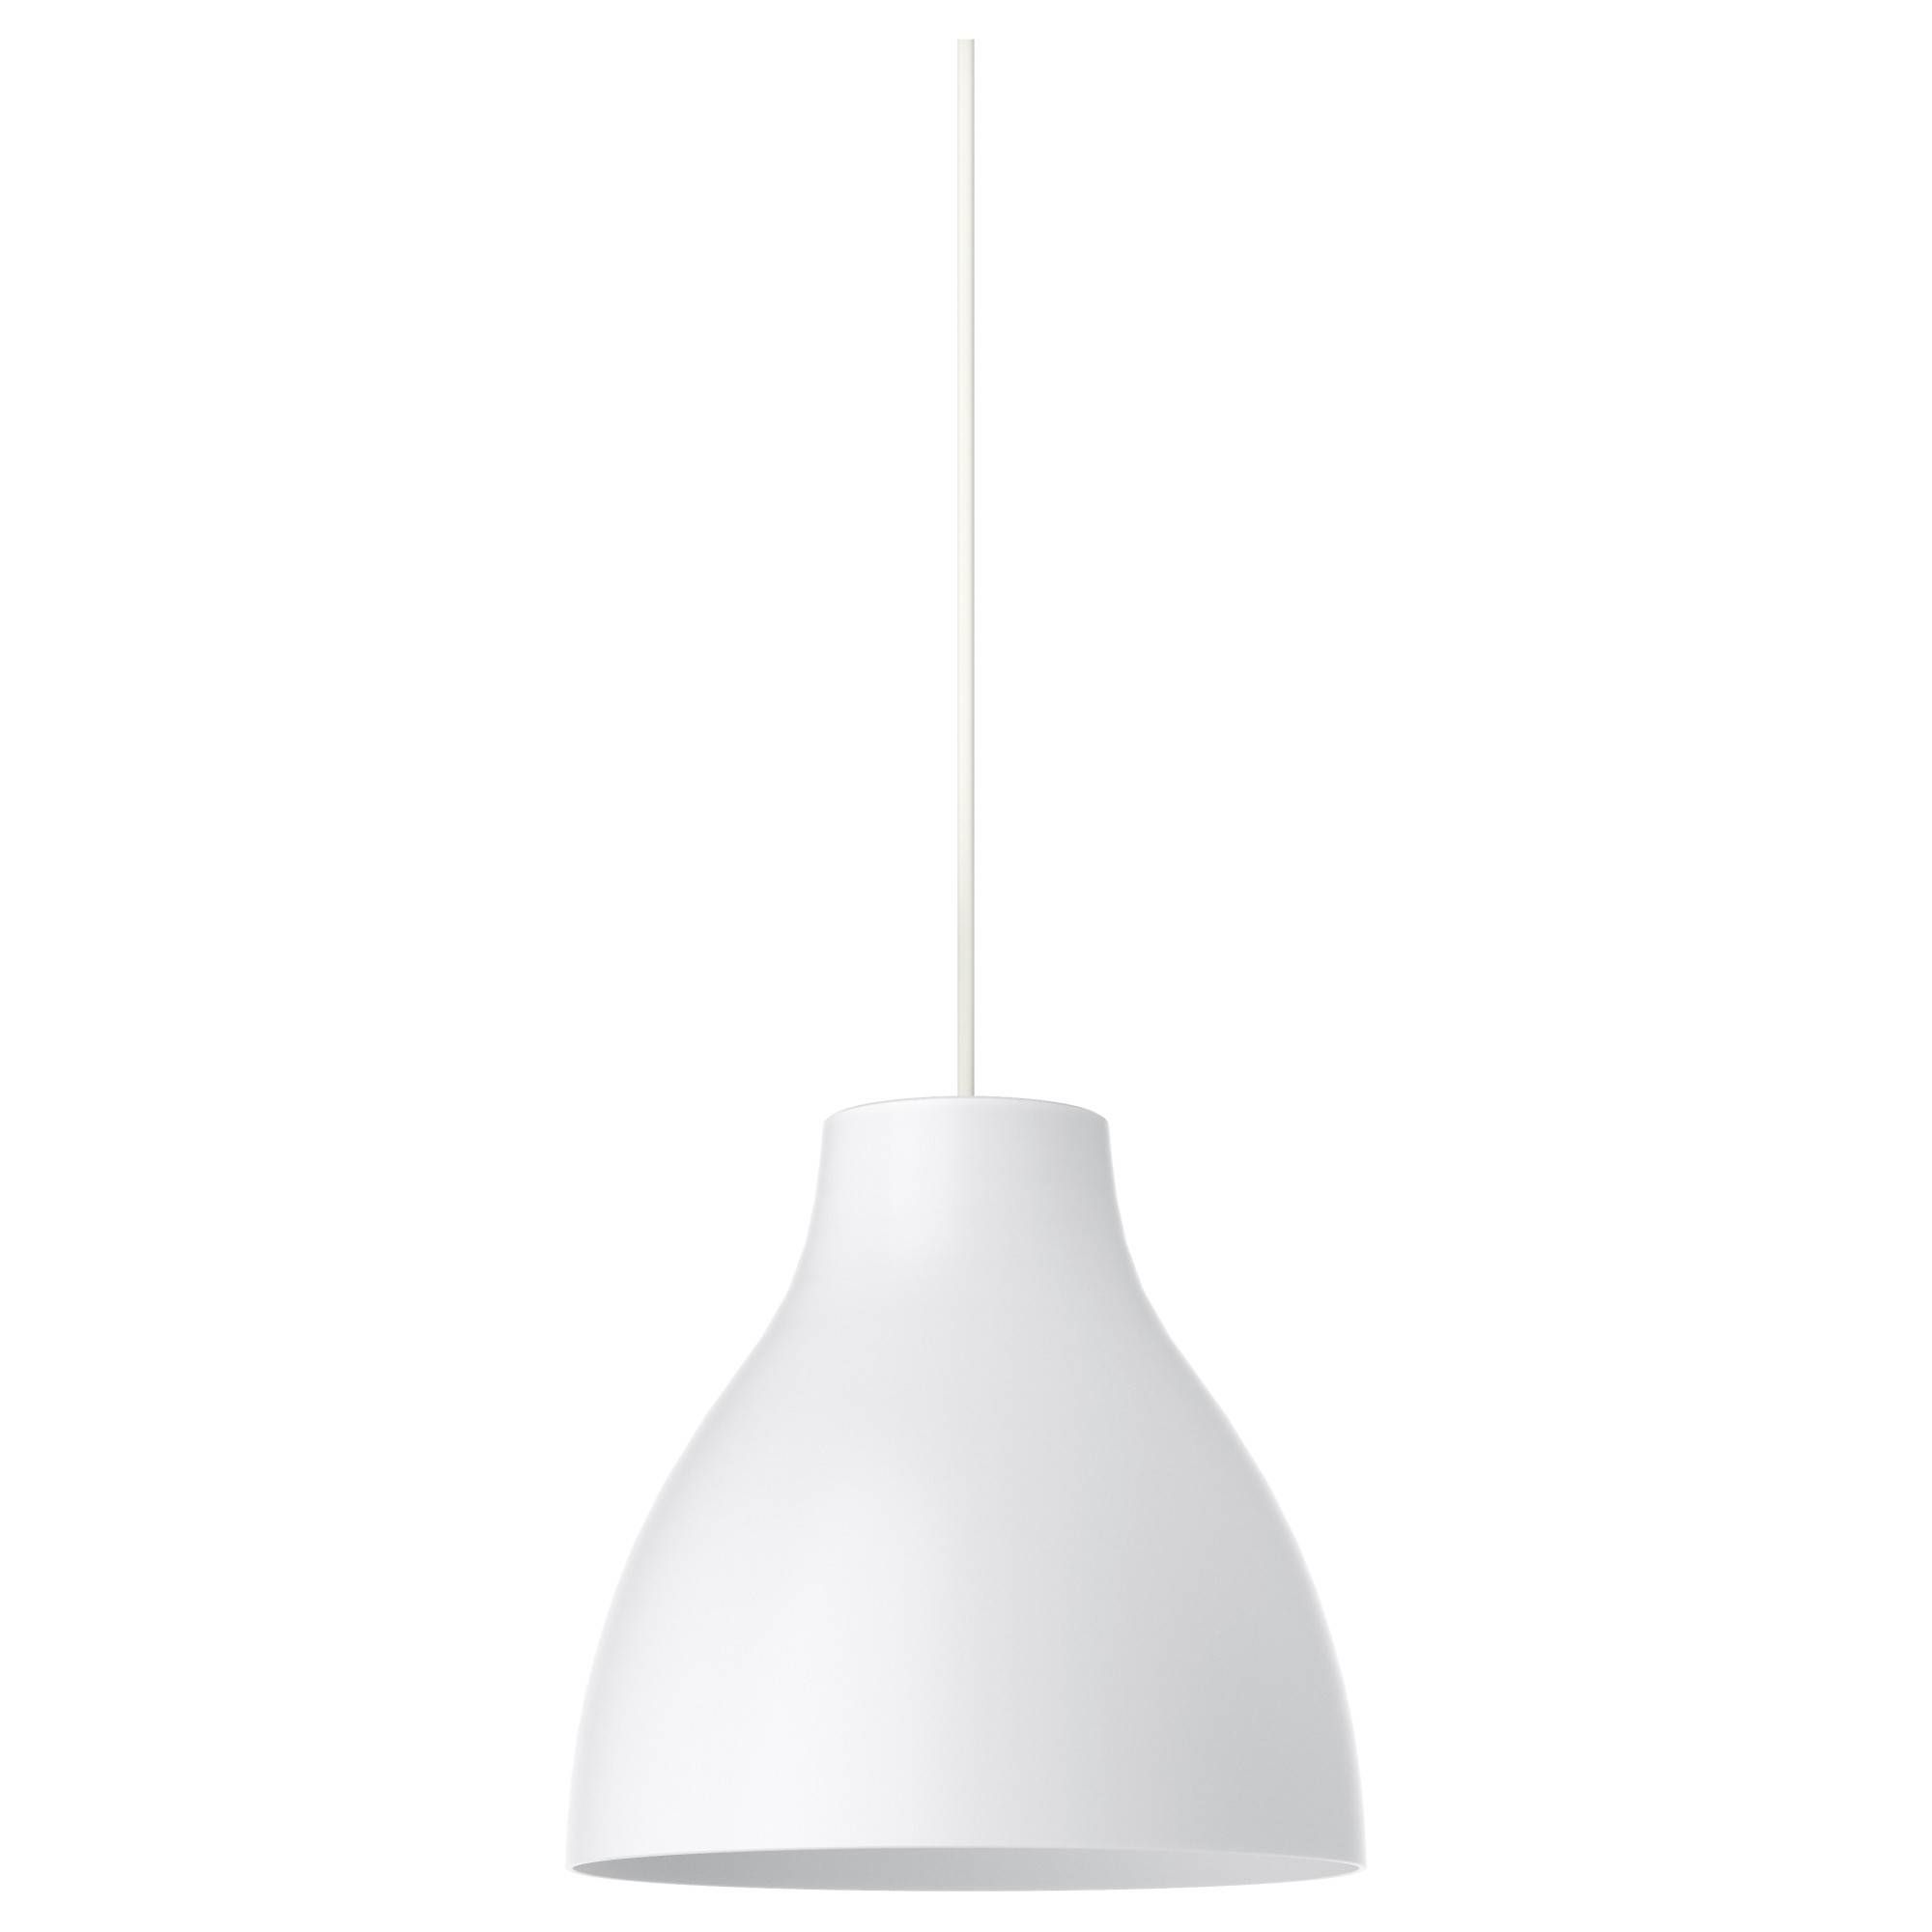 Pendant Lights & Lamp Shades – Ikea For Cheap Pendant Lights (View 11 of 15)